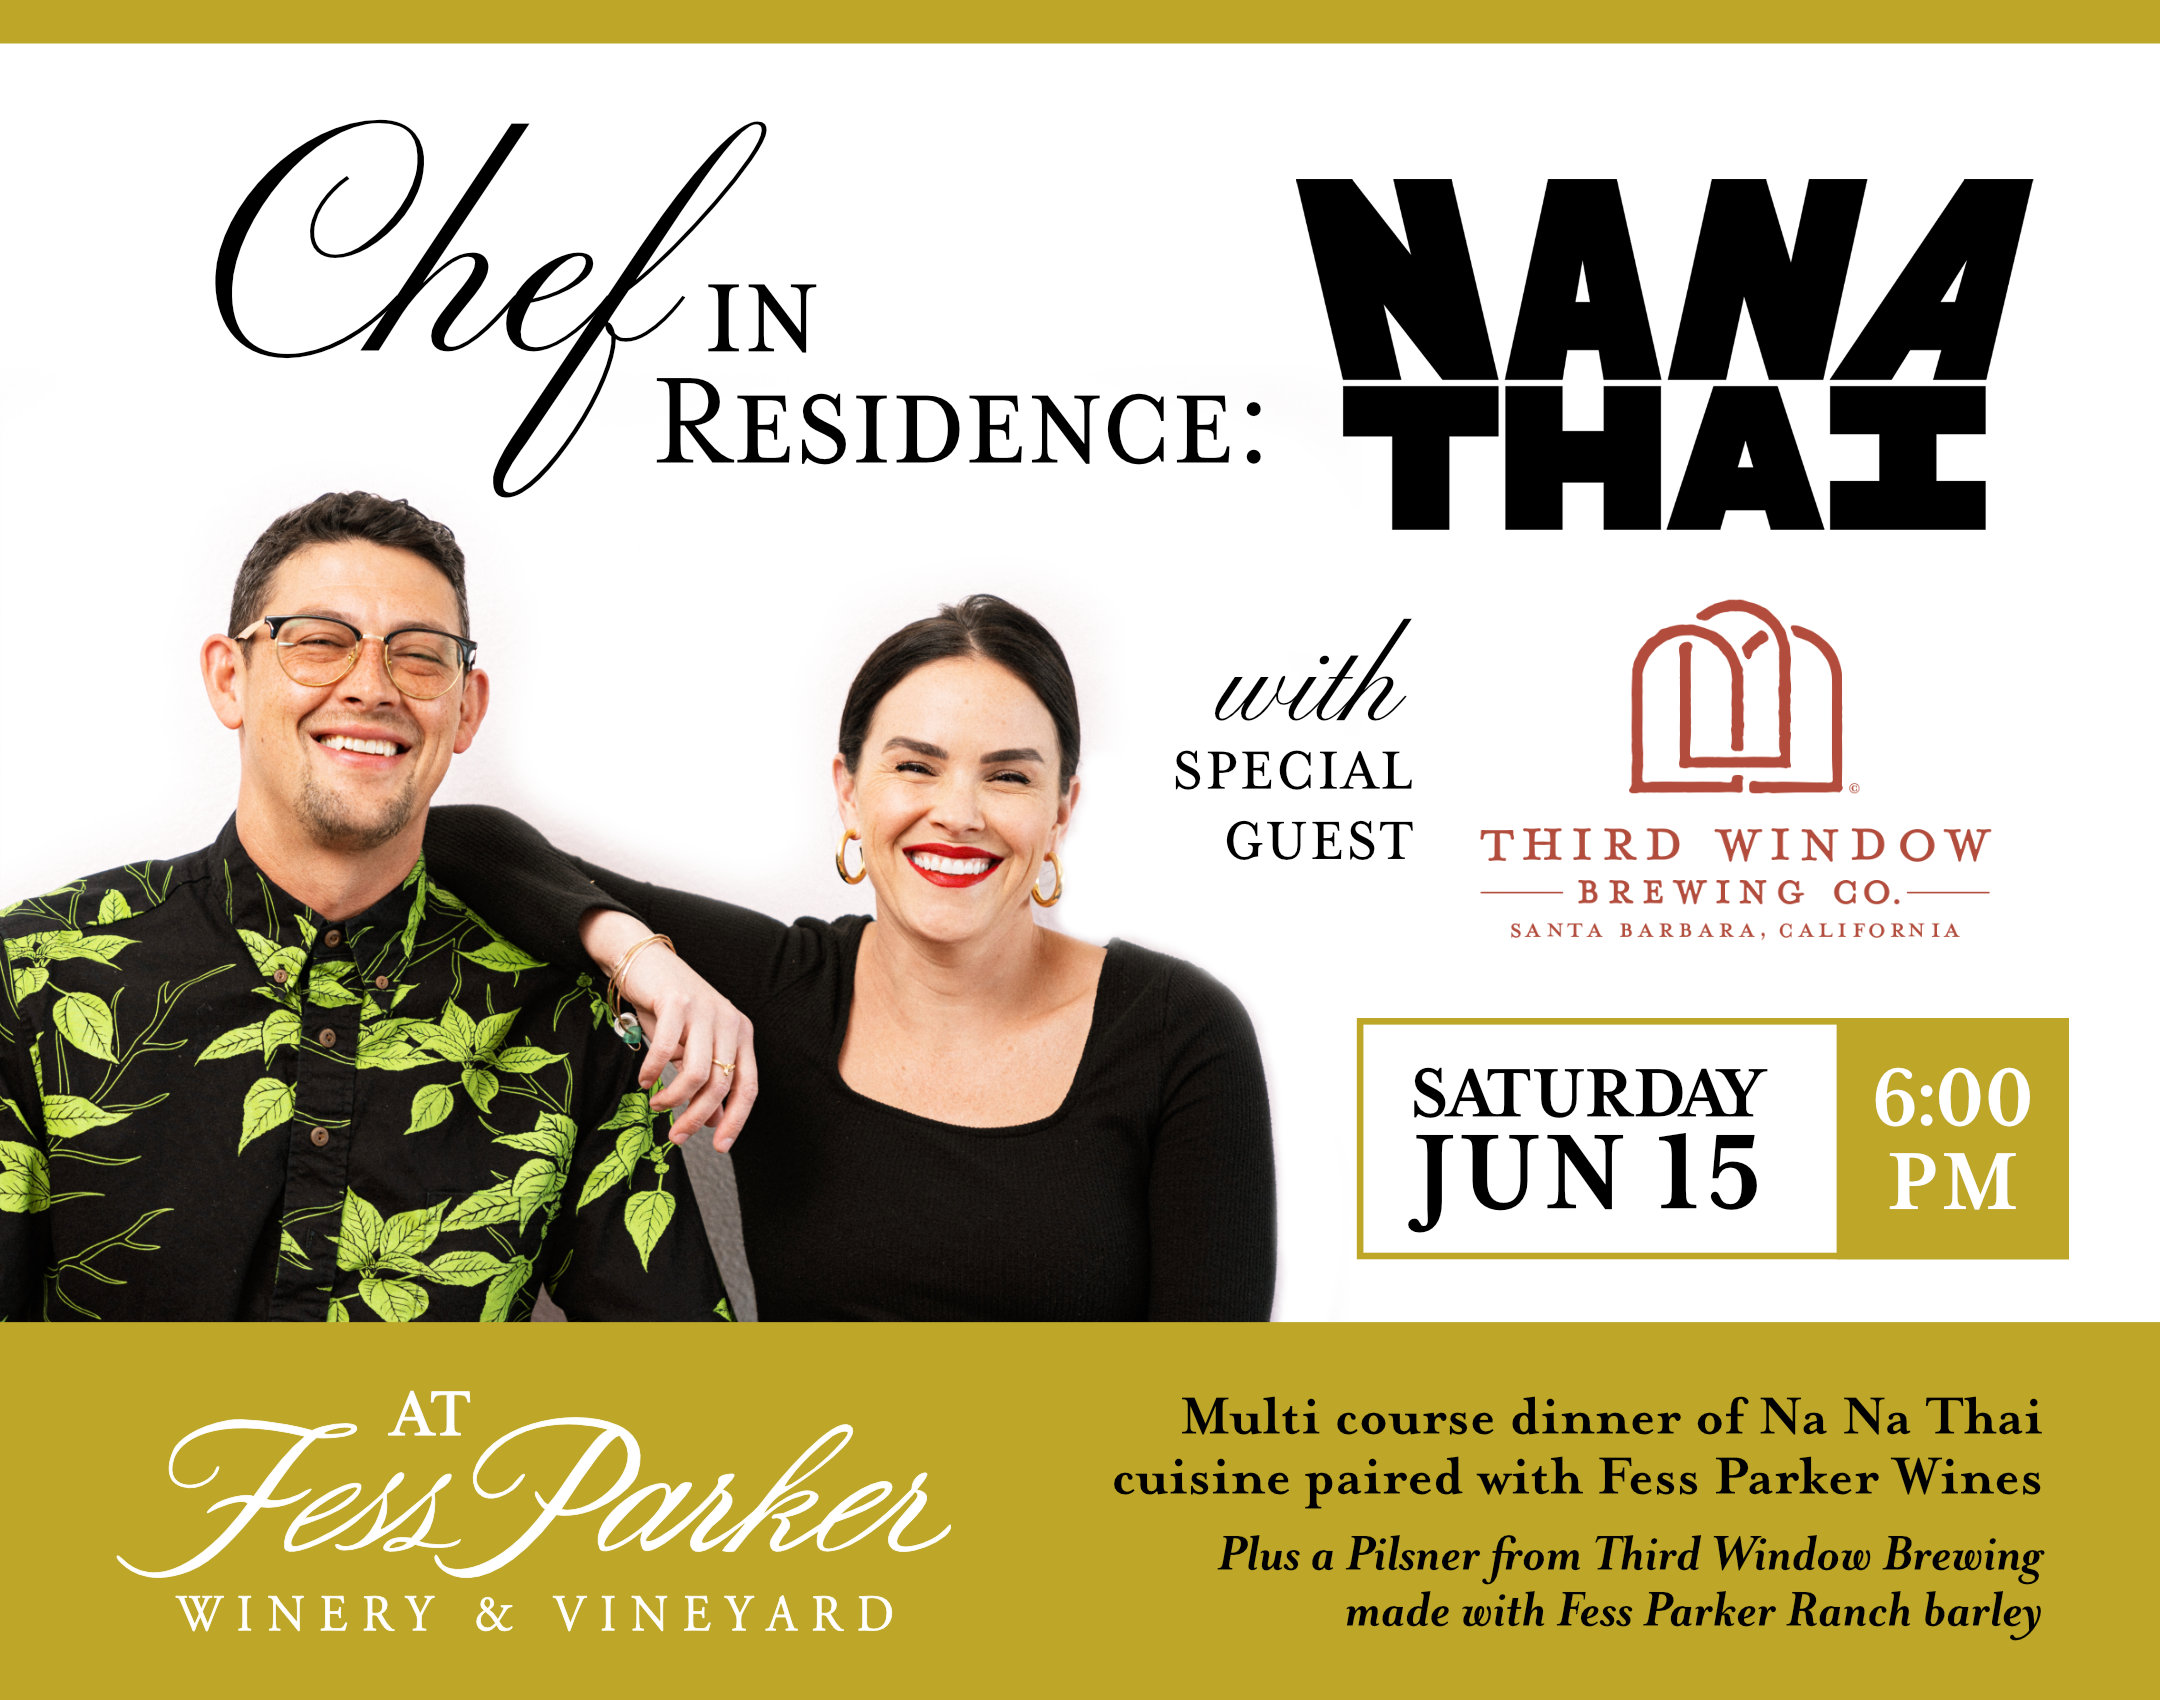 Chef in Residence: NaNa Thai with special guest Third Window Brewing